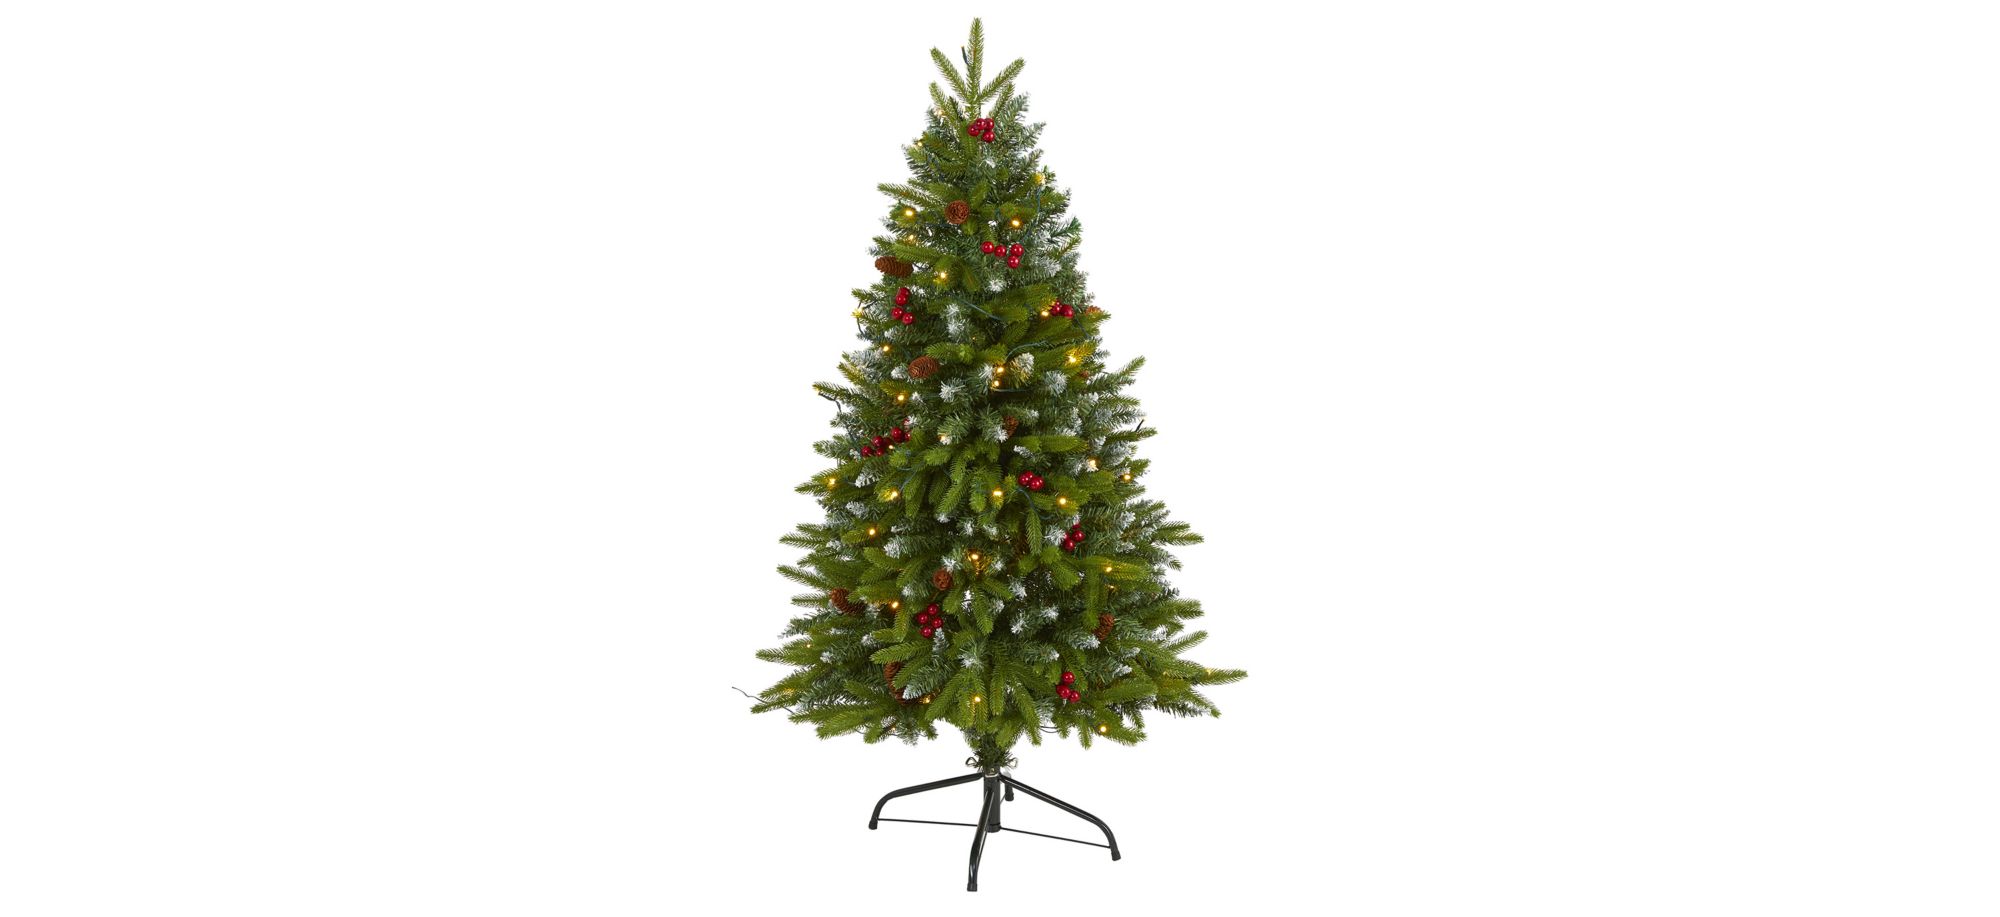 4ft. Pre-Lit Snow Tipped Portland Spruce Artificial Christmas Tree in Green by Bellanest